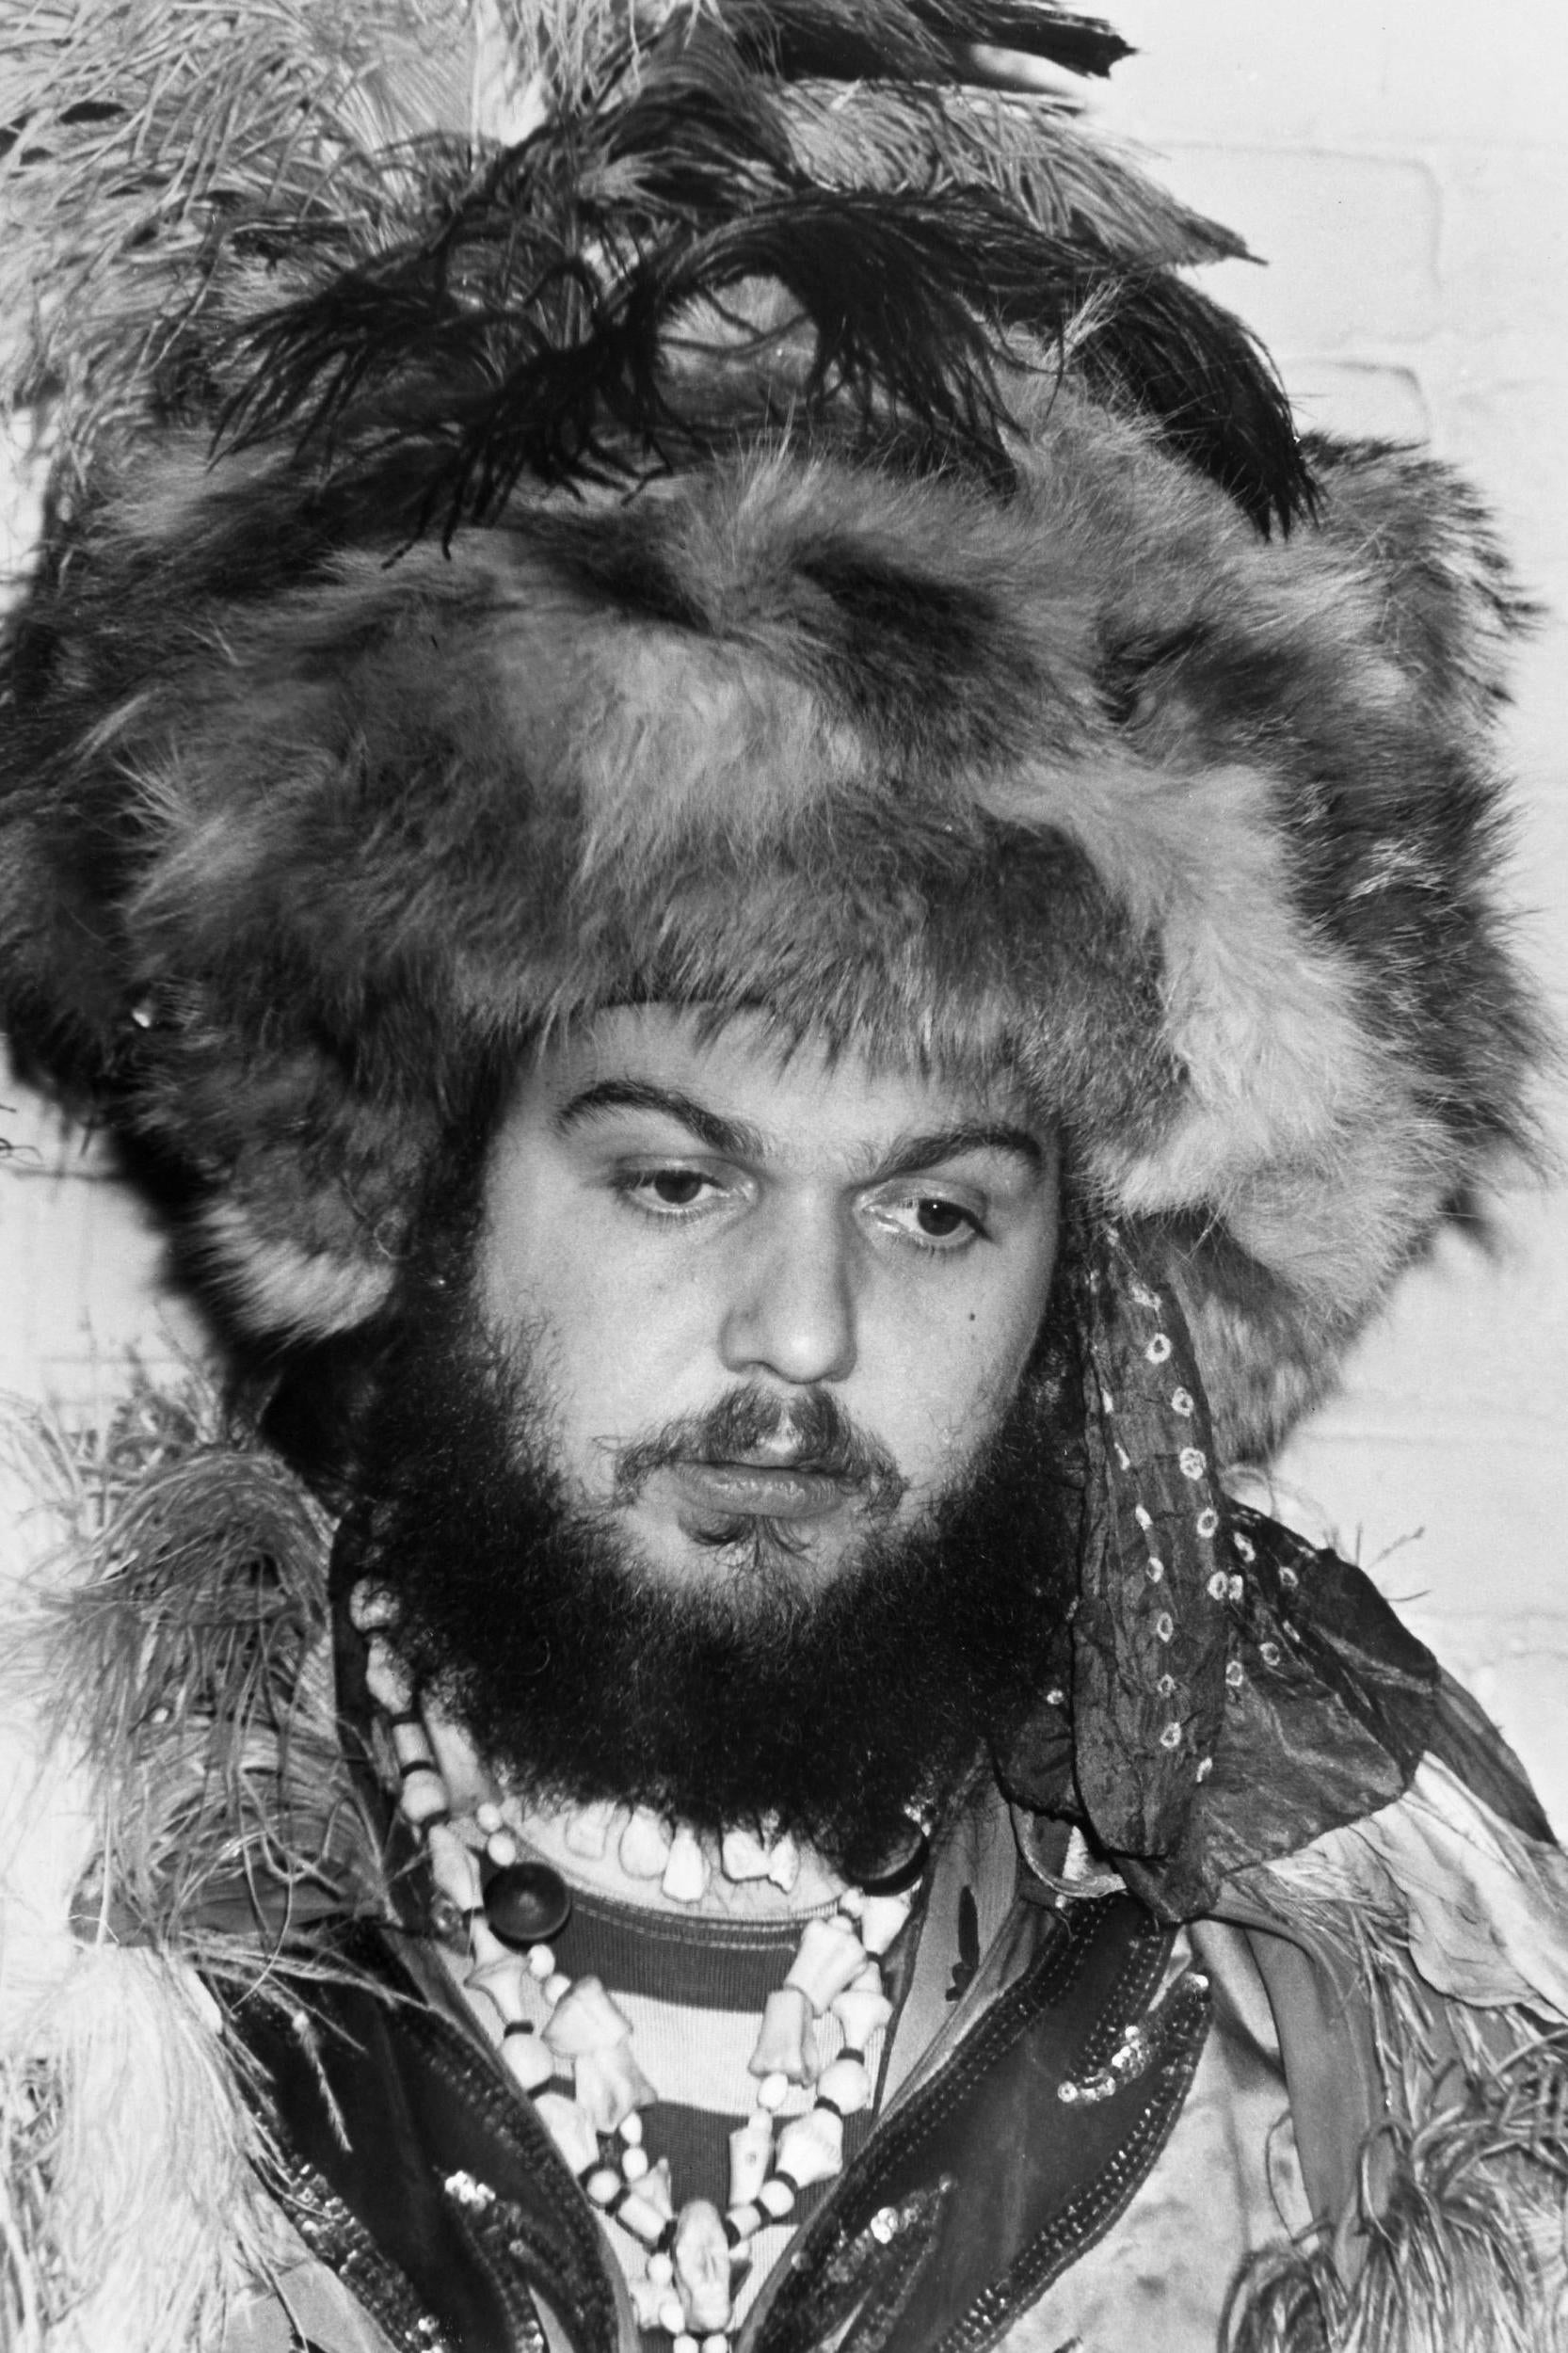 Dr John in signature headdress, feathers, rings and beads (Rex)